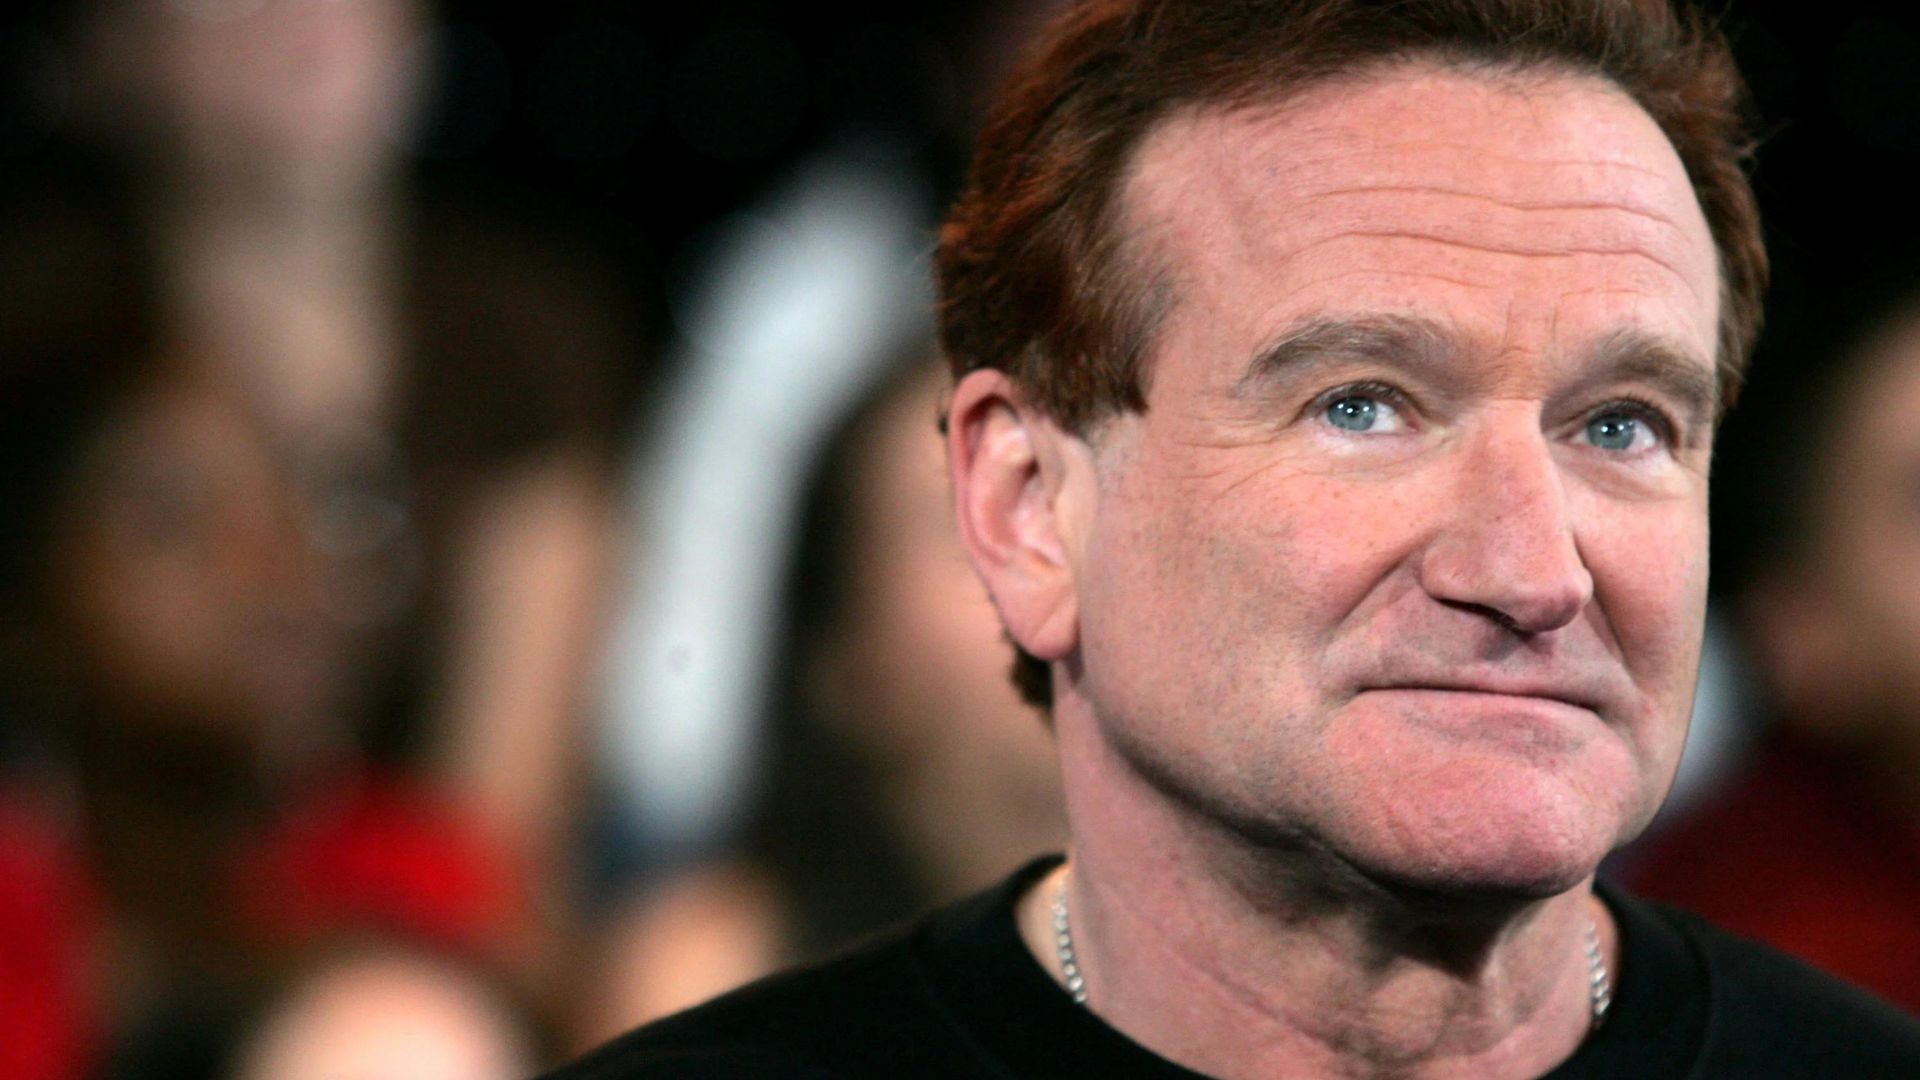 Robin Williams Wearing A Black Shirt And Silver Necklace